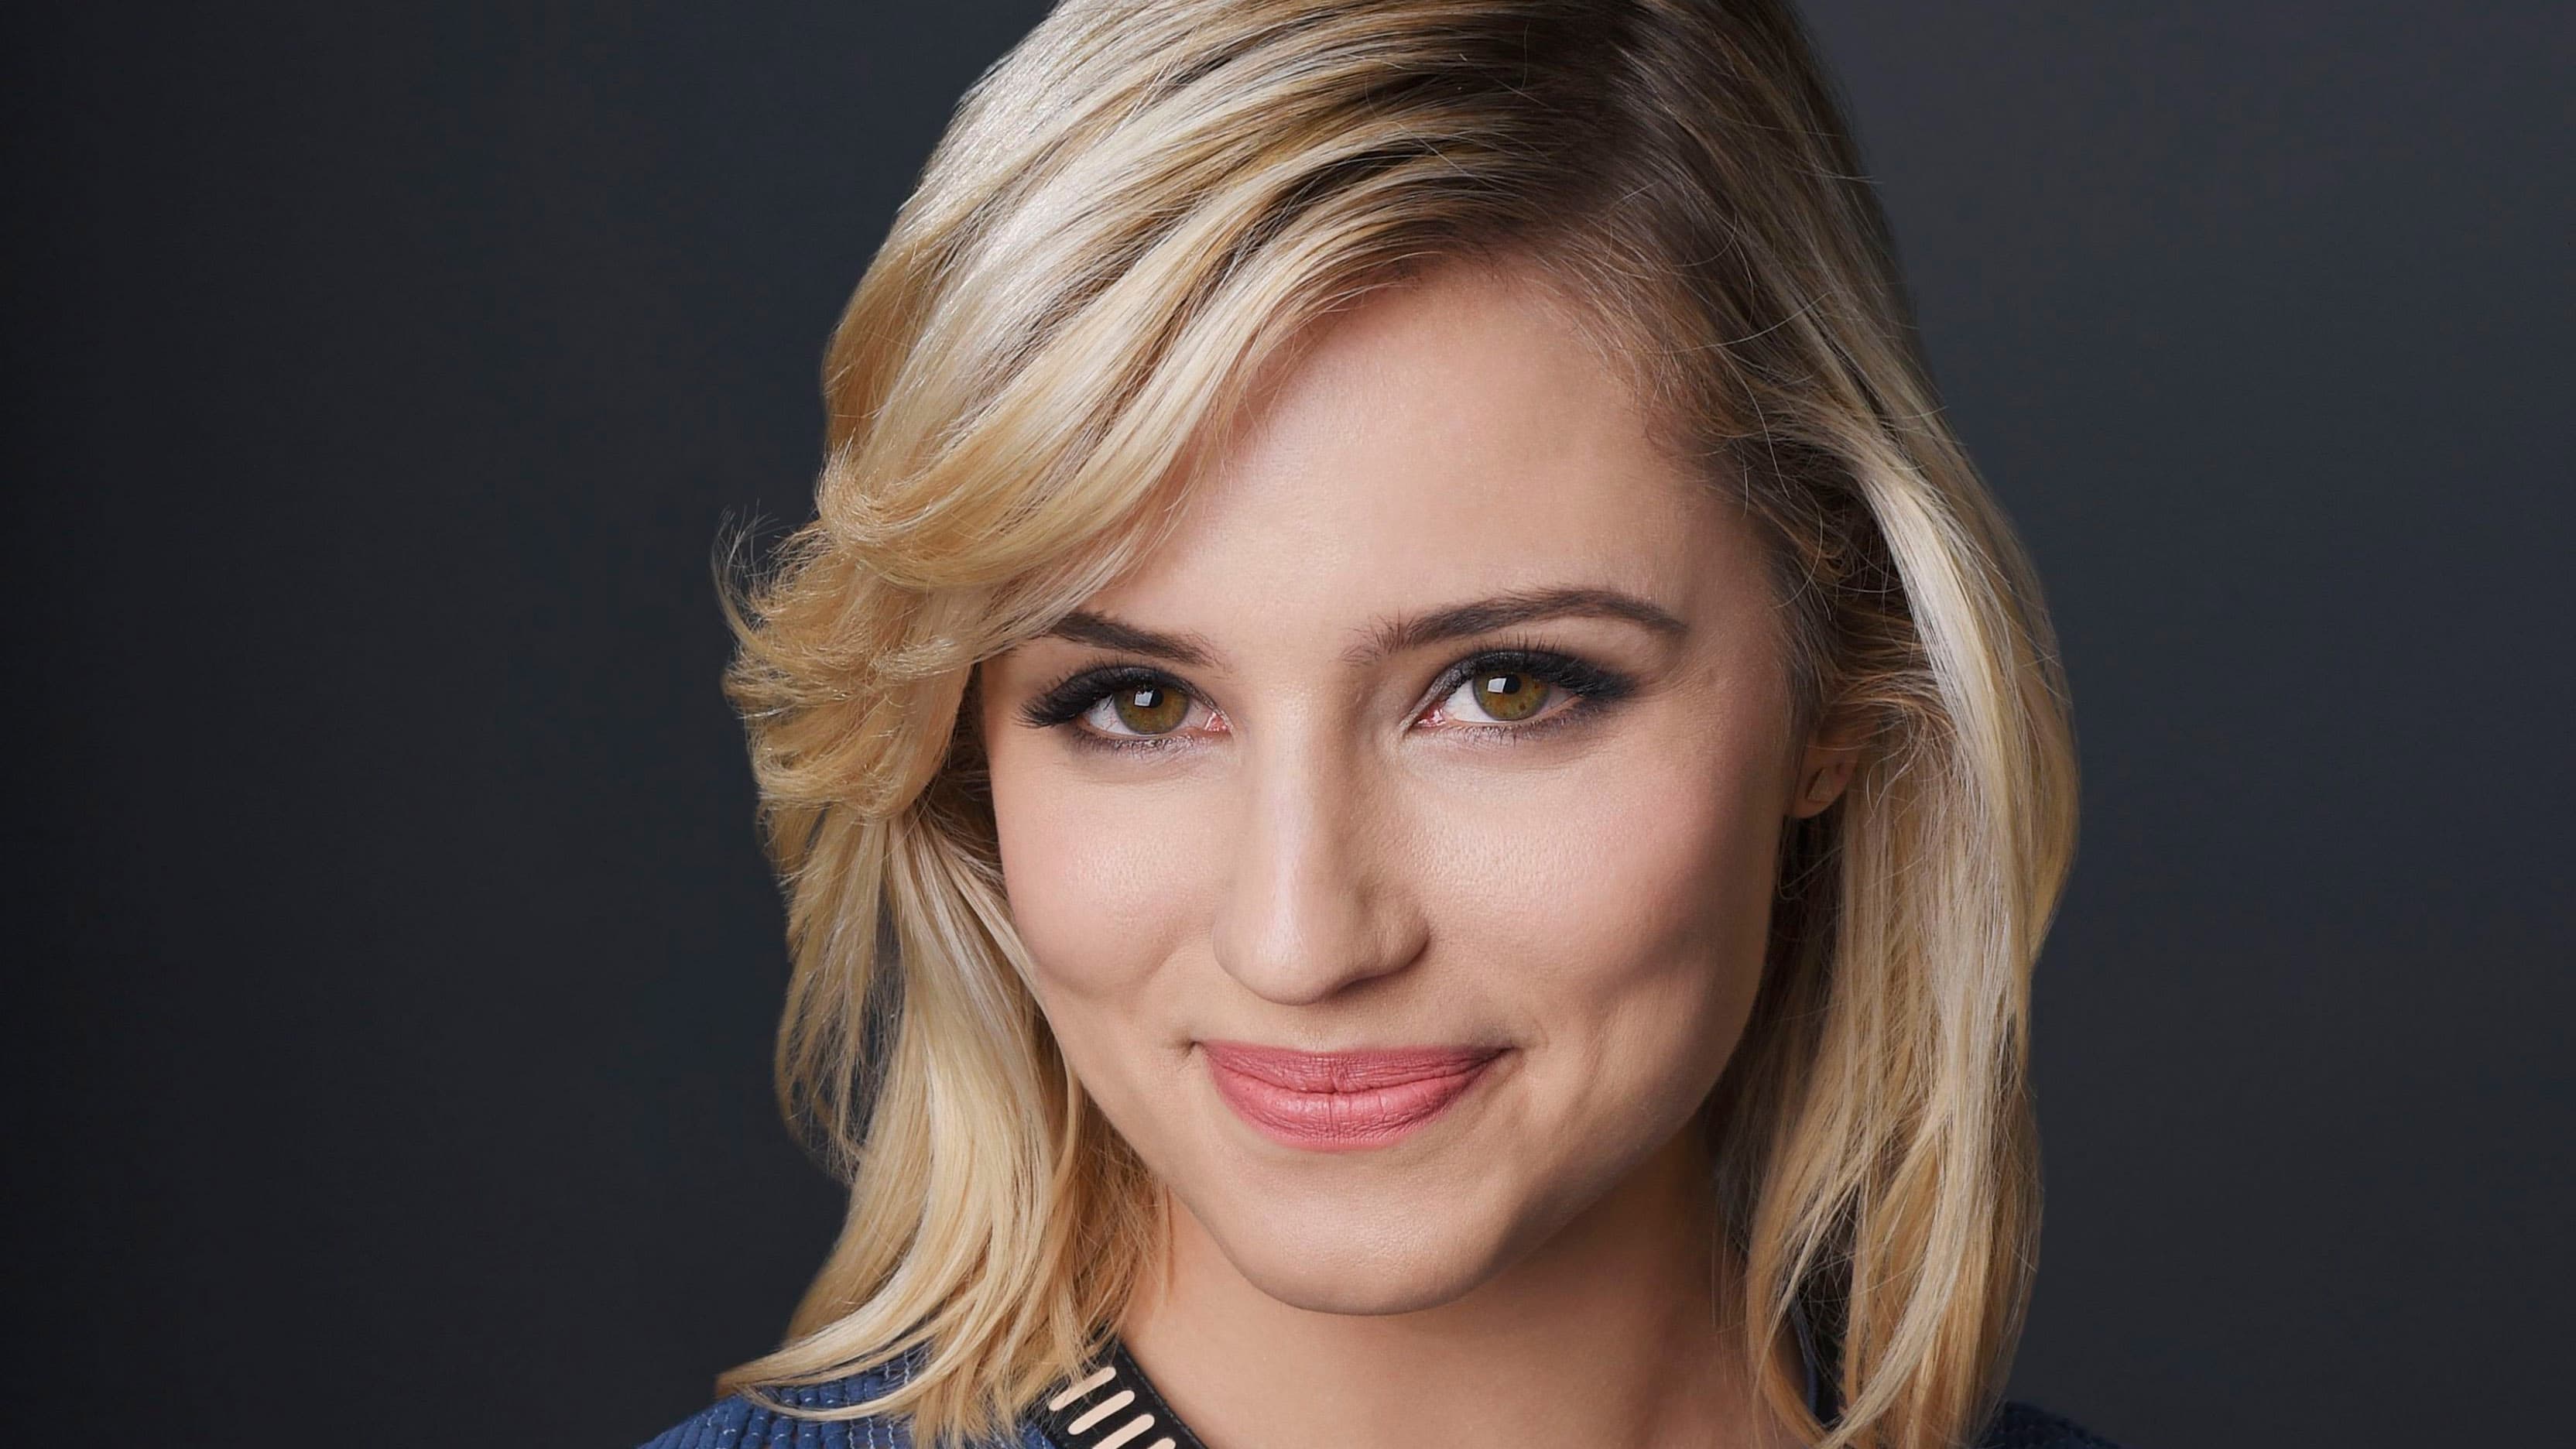 celebrity, dianna agron, actress, american, blonde, face, smile